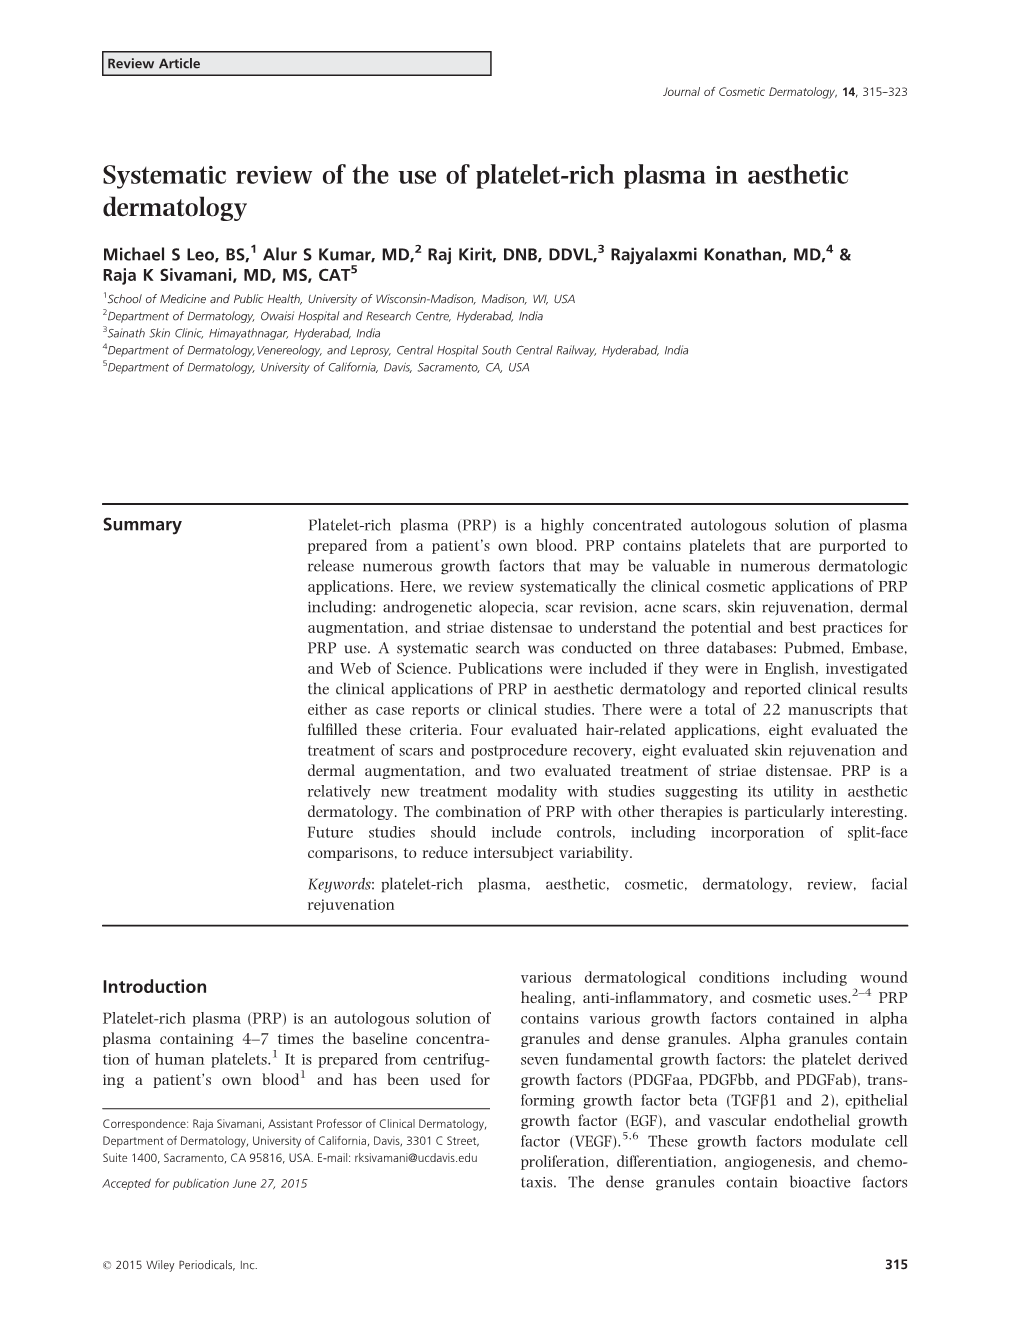 Systematic Review of the Use of Platelet-Rich Plasma in Aesthetic Dermatology